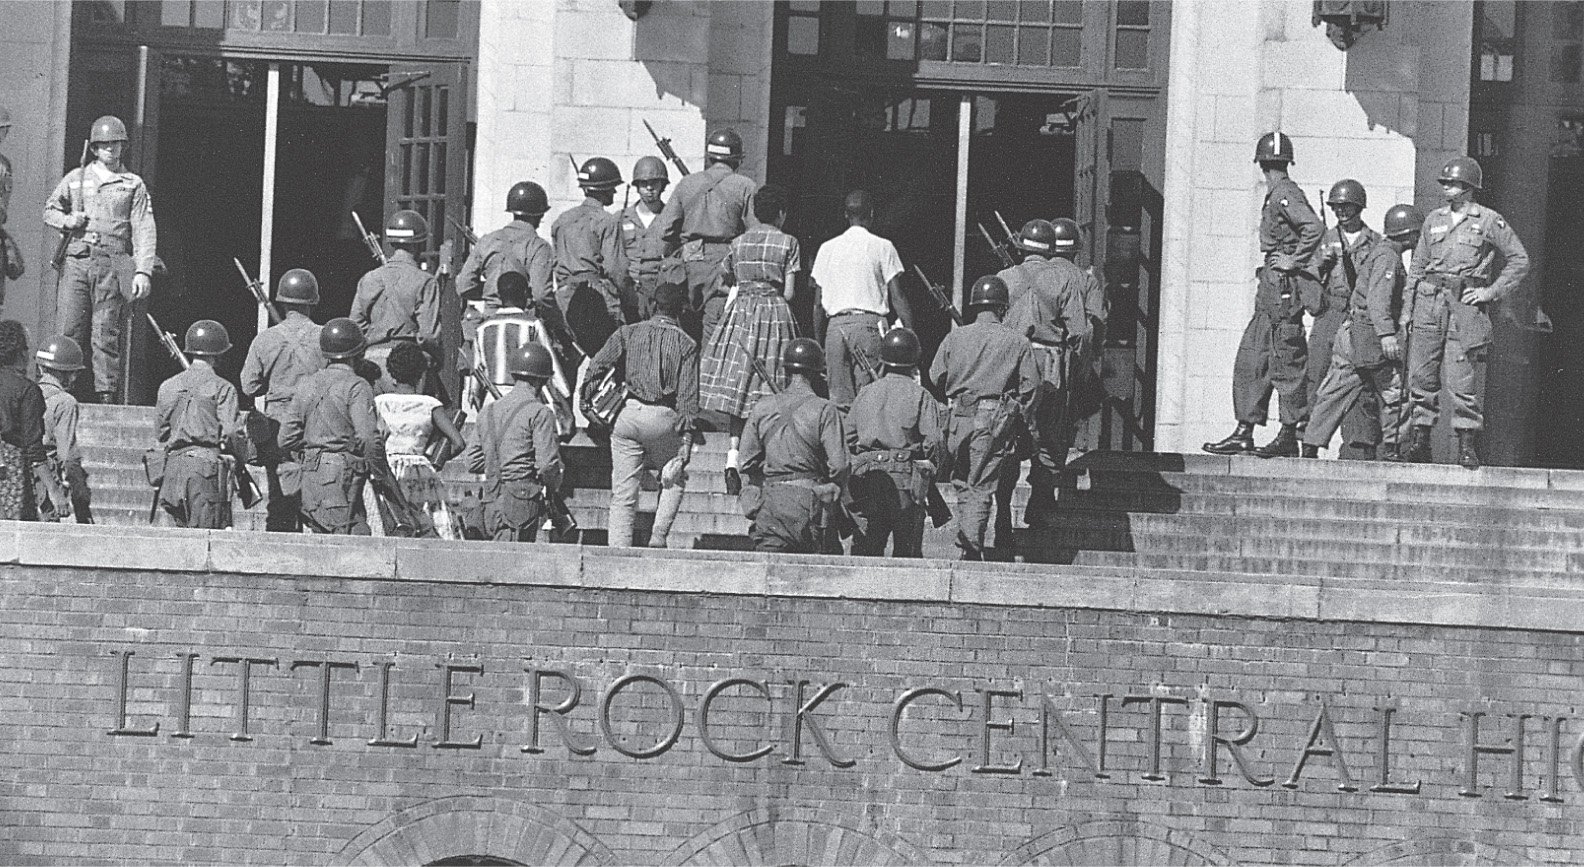 A photo: soldiers with bayonetted rifles escort African American students into Little Rock Central High School.